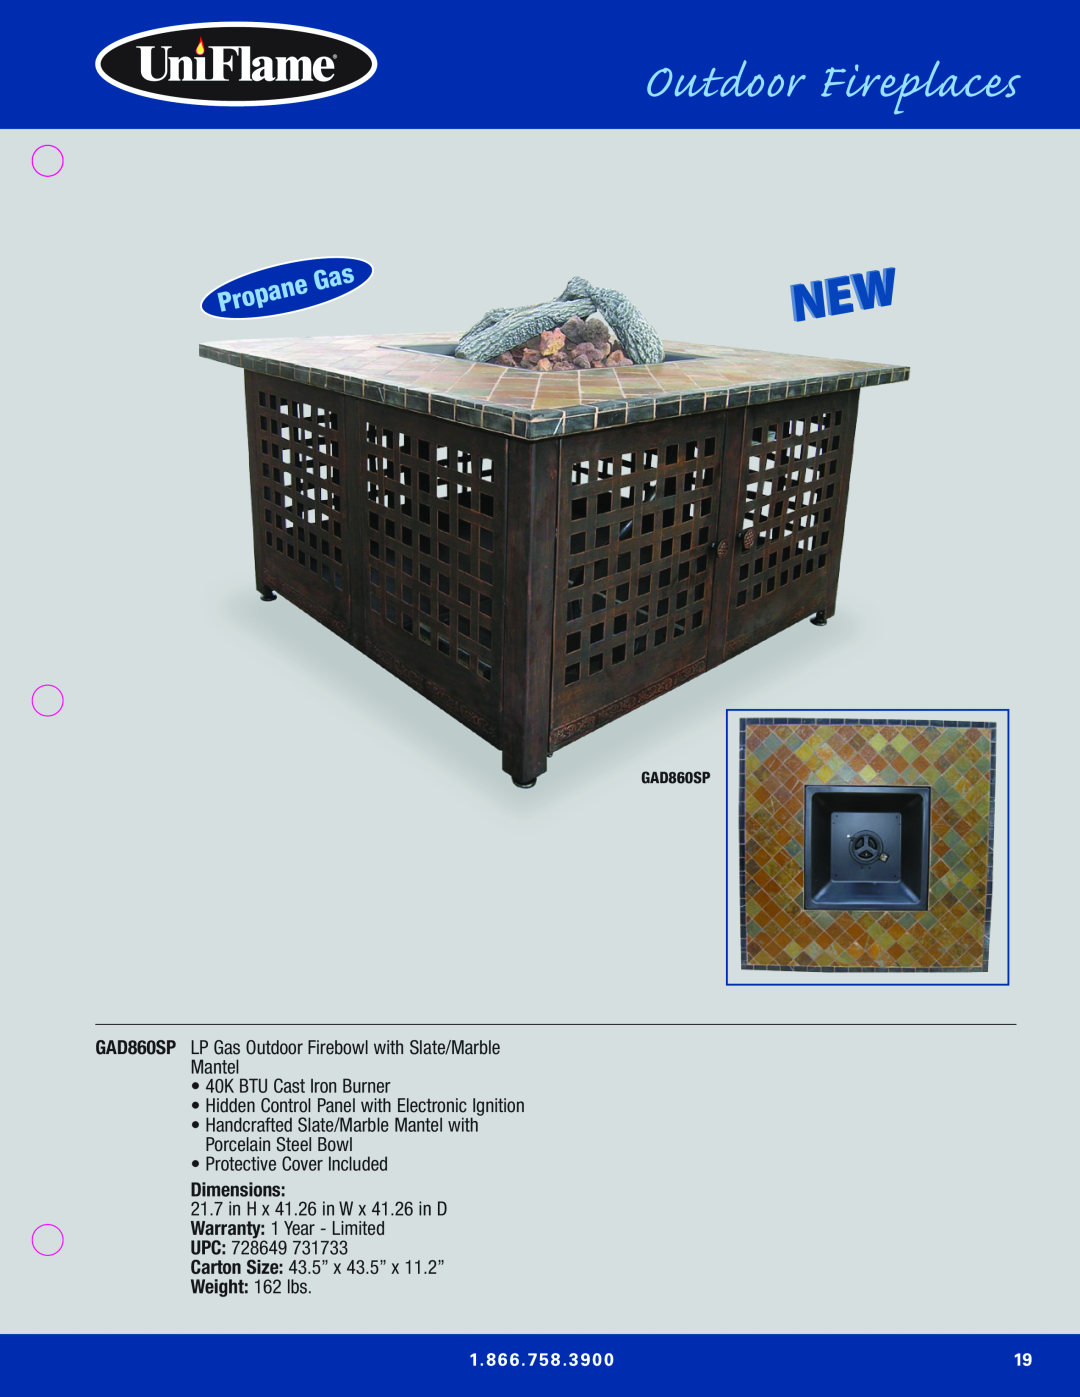 Blue Rhino Outdoor Lighting Outdoor Fireplaces, Mantel •40K BTU Cast Iron Burner, •Protective Cover Included, Dimensions 